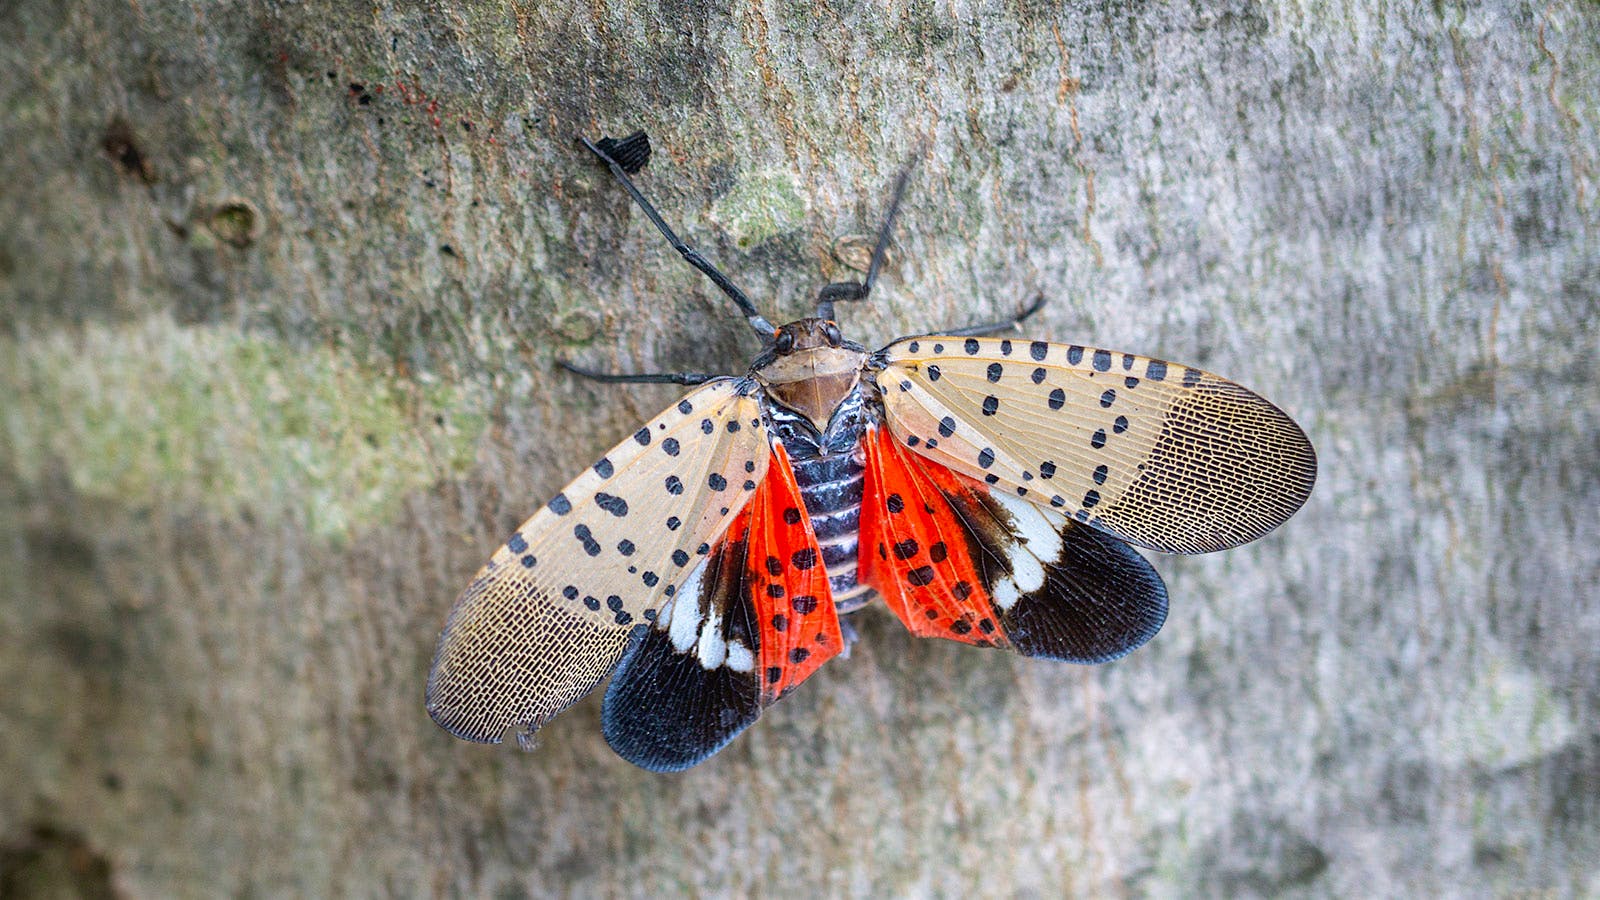 Vine-Killing Spotted Lanternfly Continues to Spread